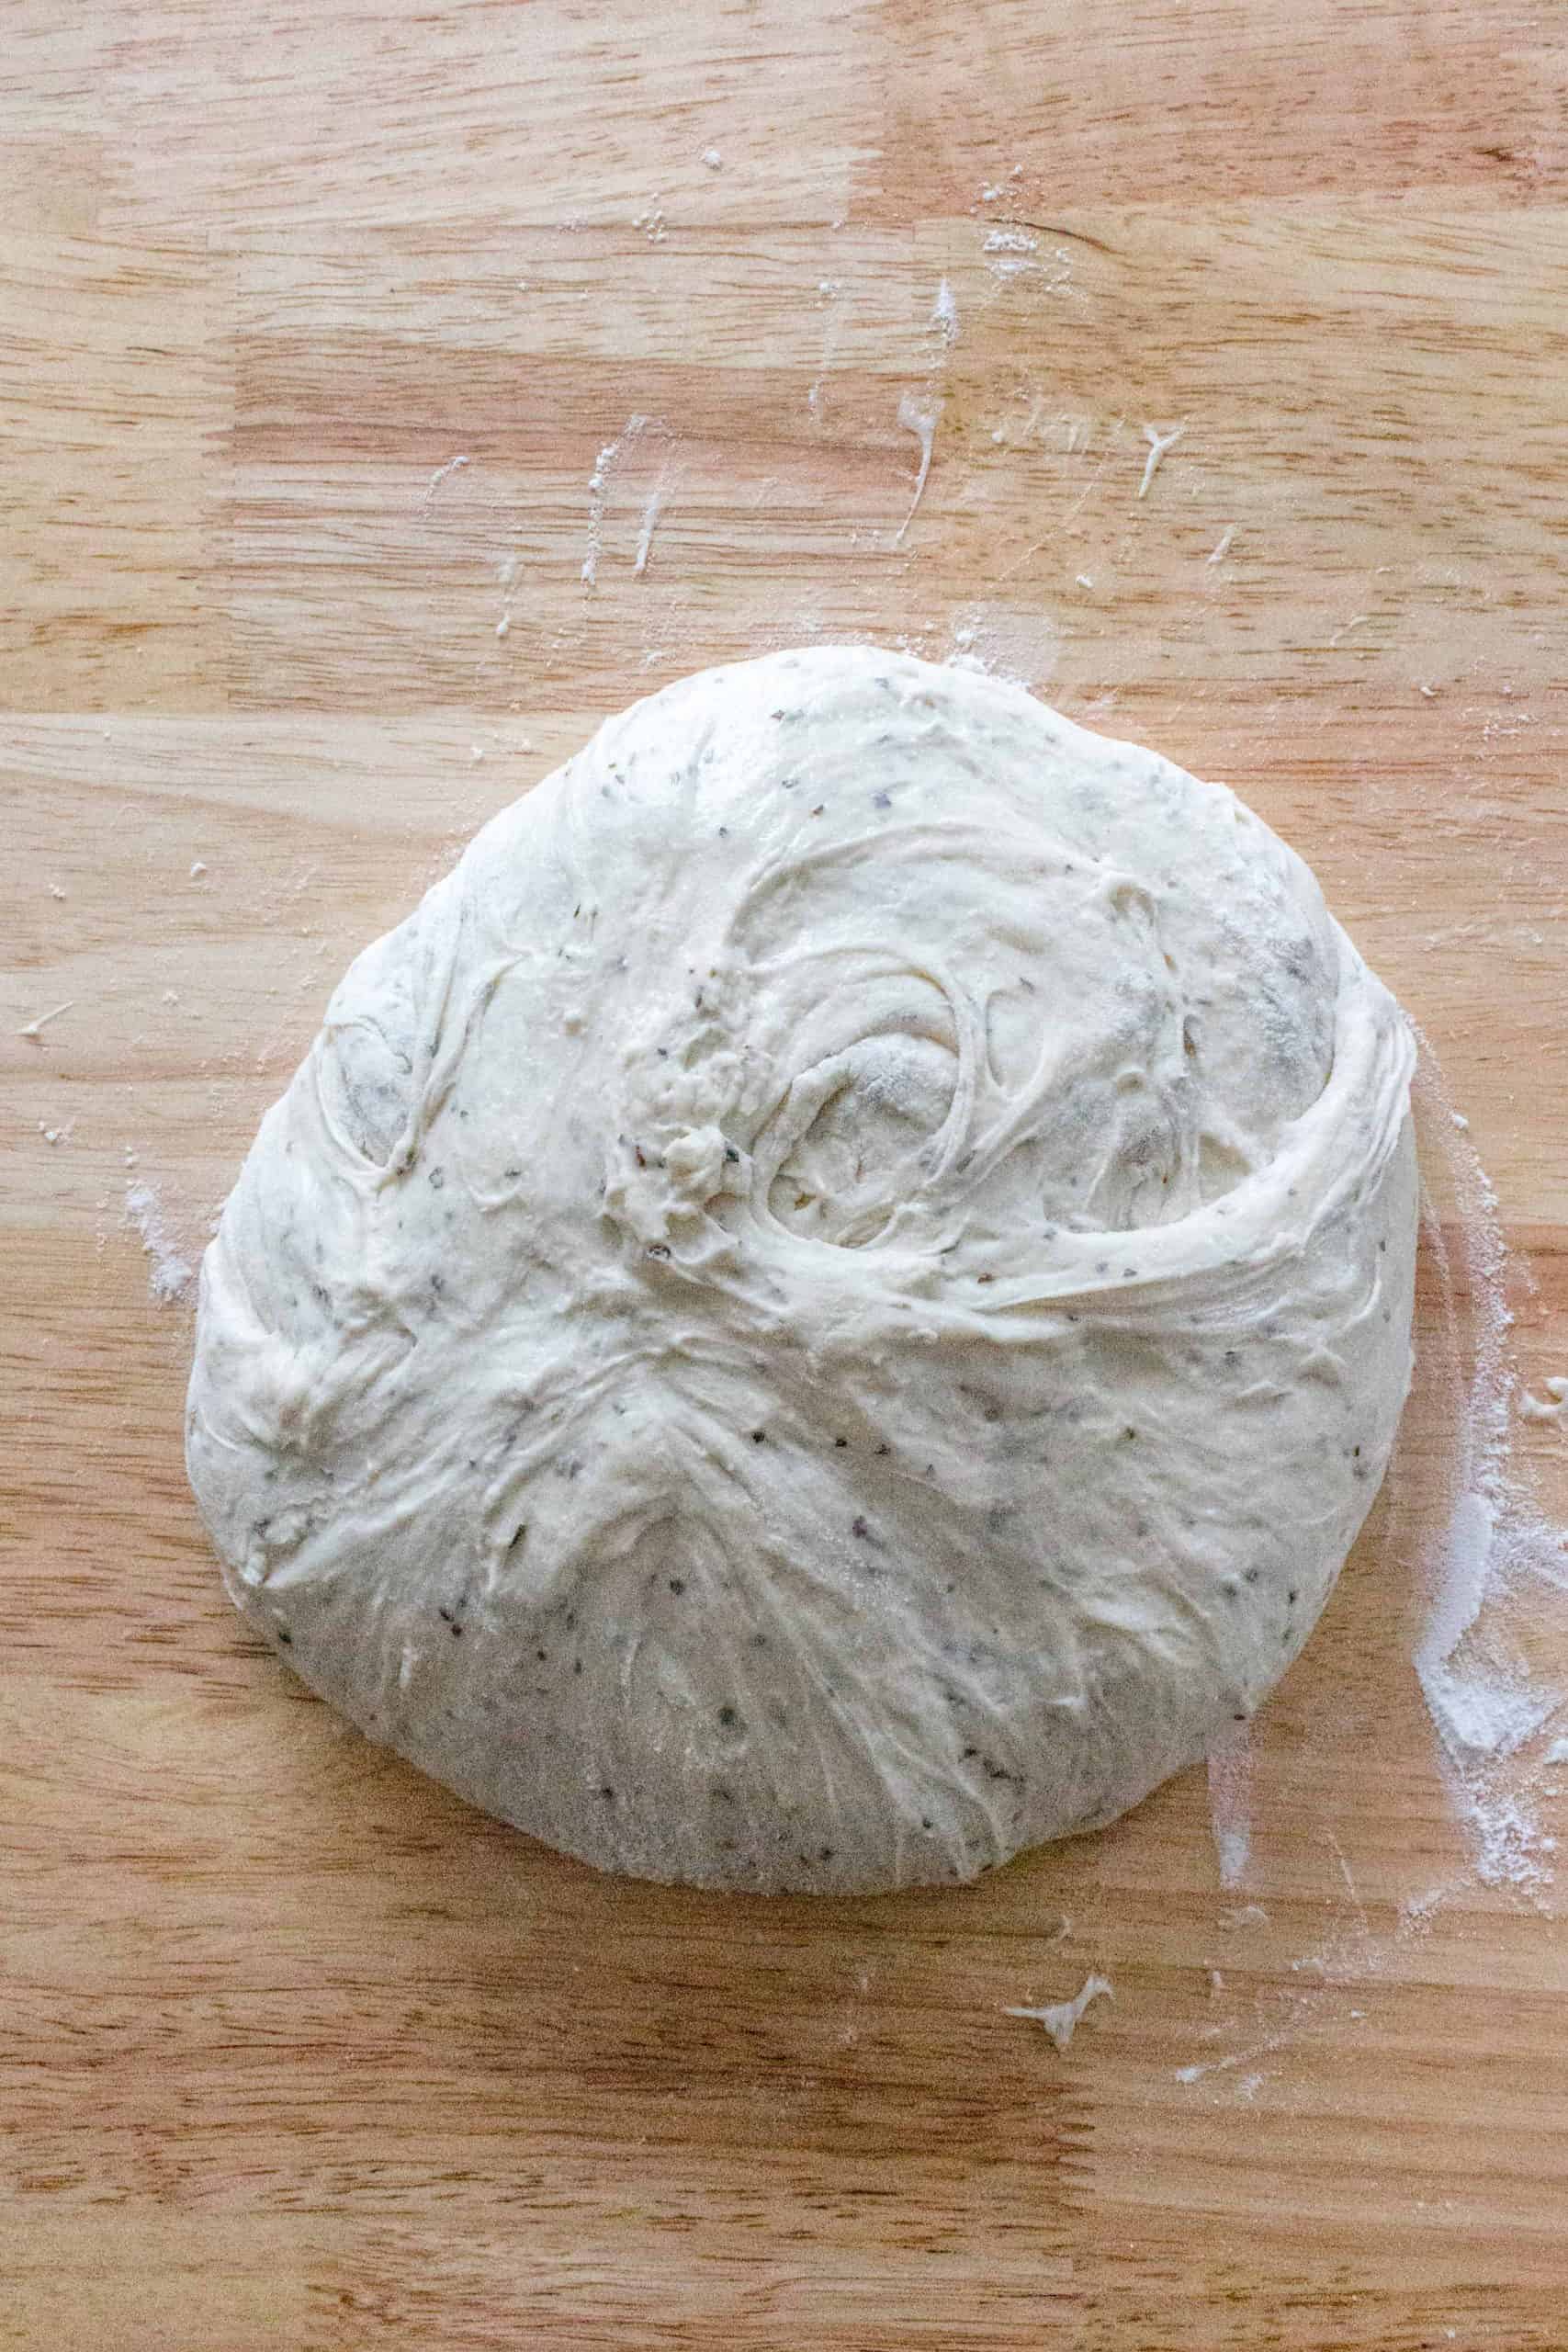 Lightly flour your kitchen counter, gently remove the dough from the bowl onto the counter, and gently fold the dough into a round ball. I fold the dough from the sides and gently tuck the bottoms in with my fingertips.